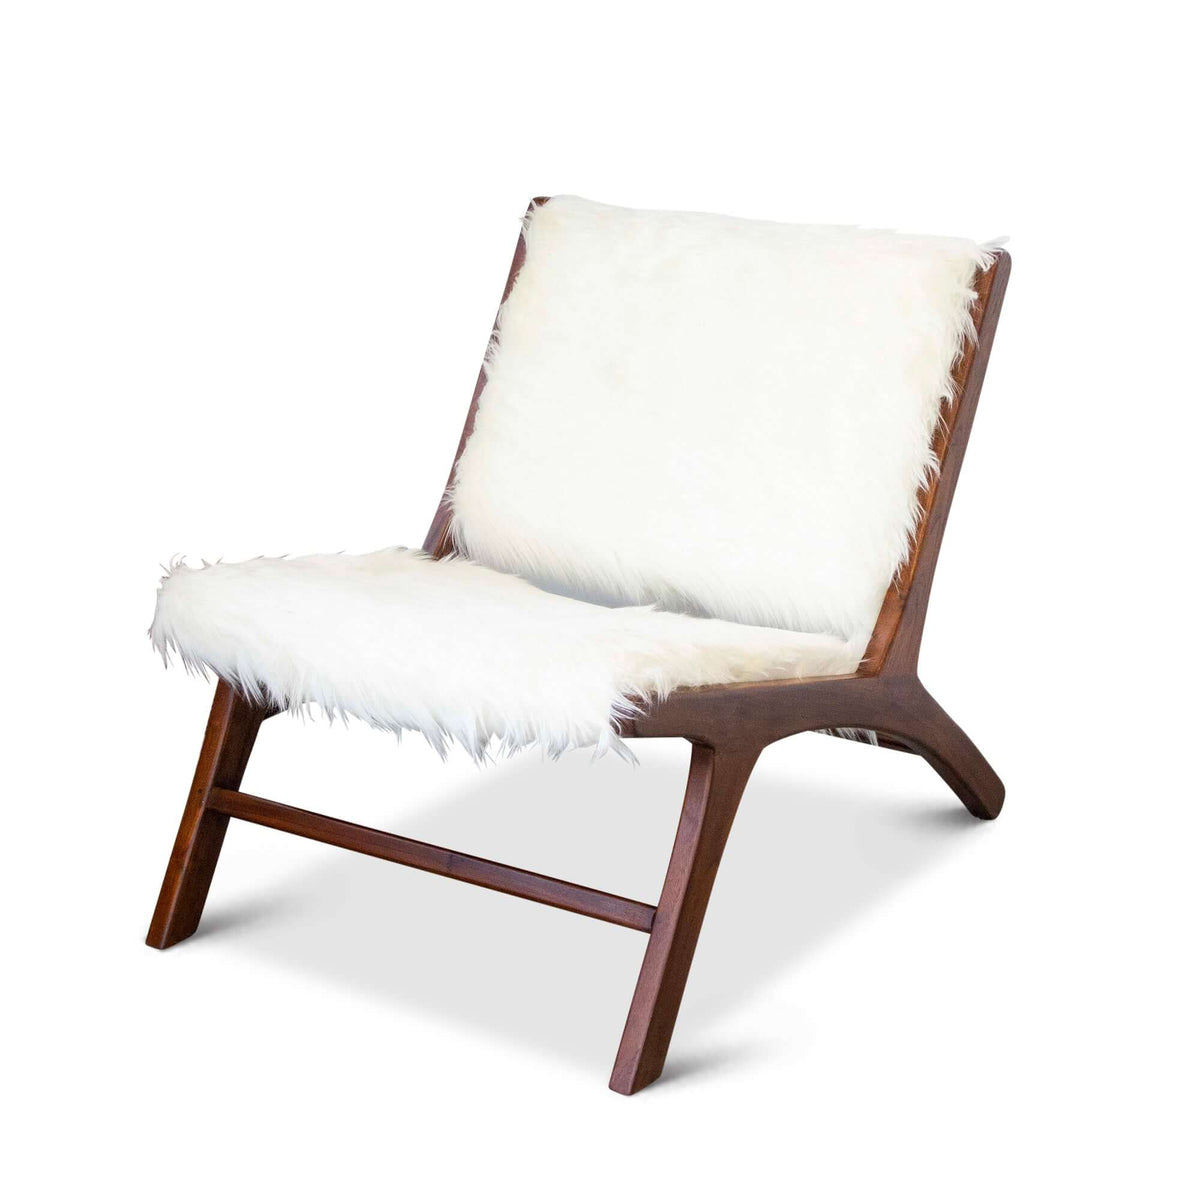 Haley Mid-Century Modern Furry Upholstered Lounge Chair in White